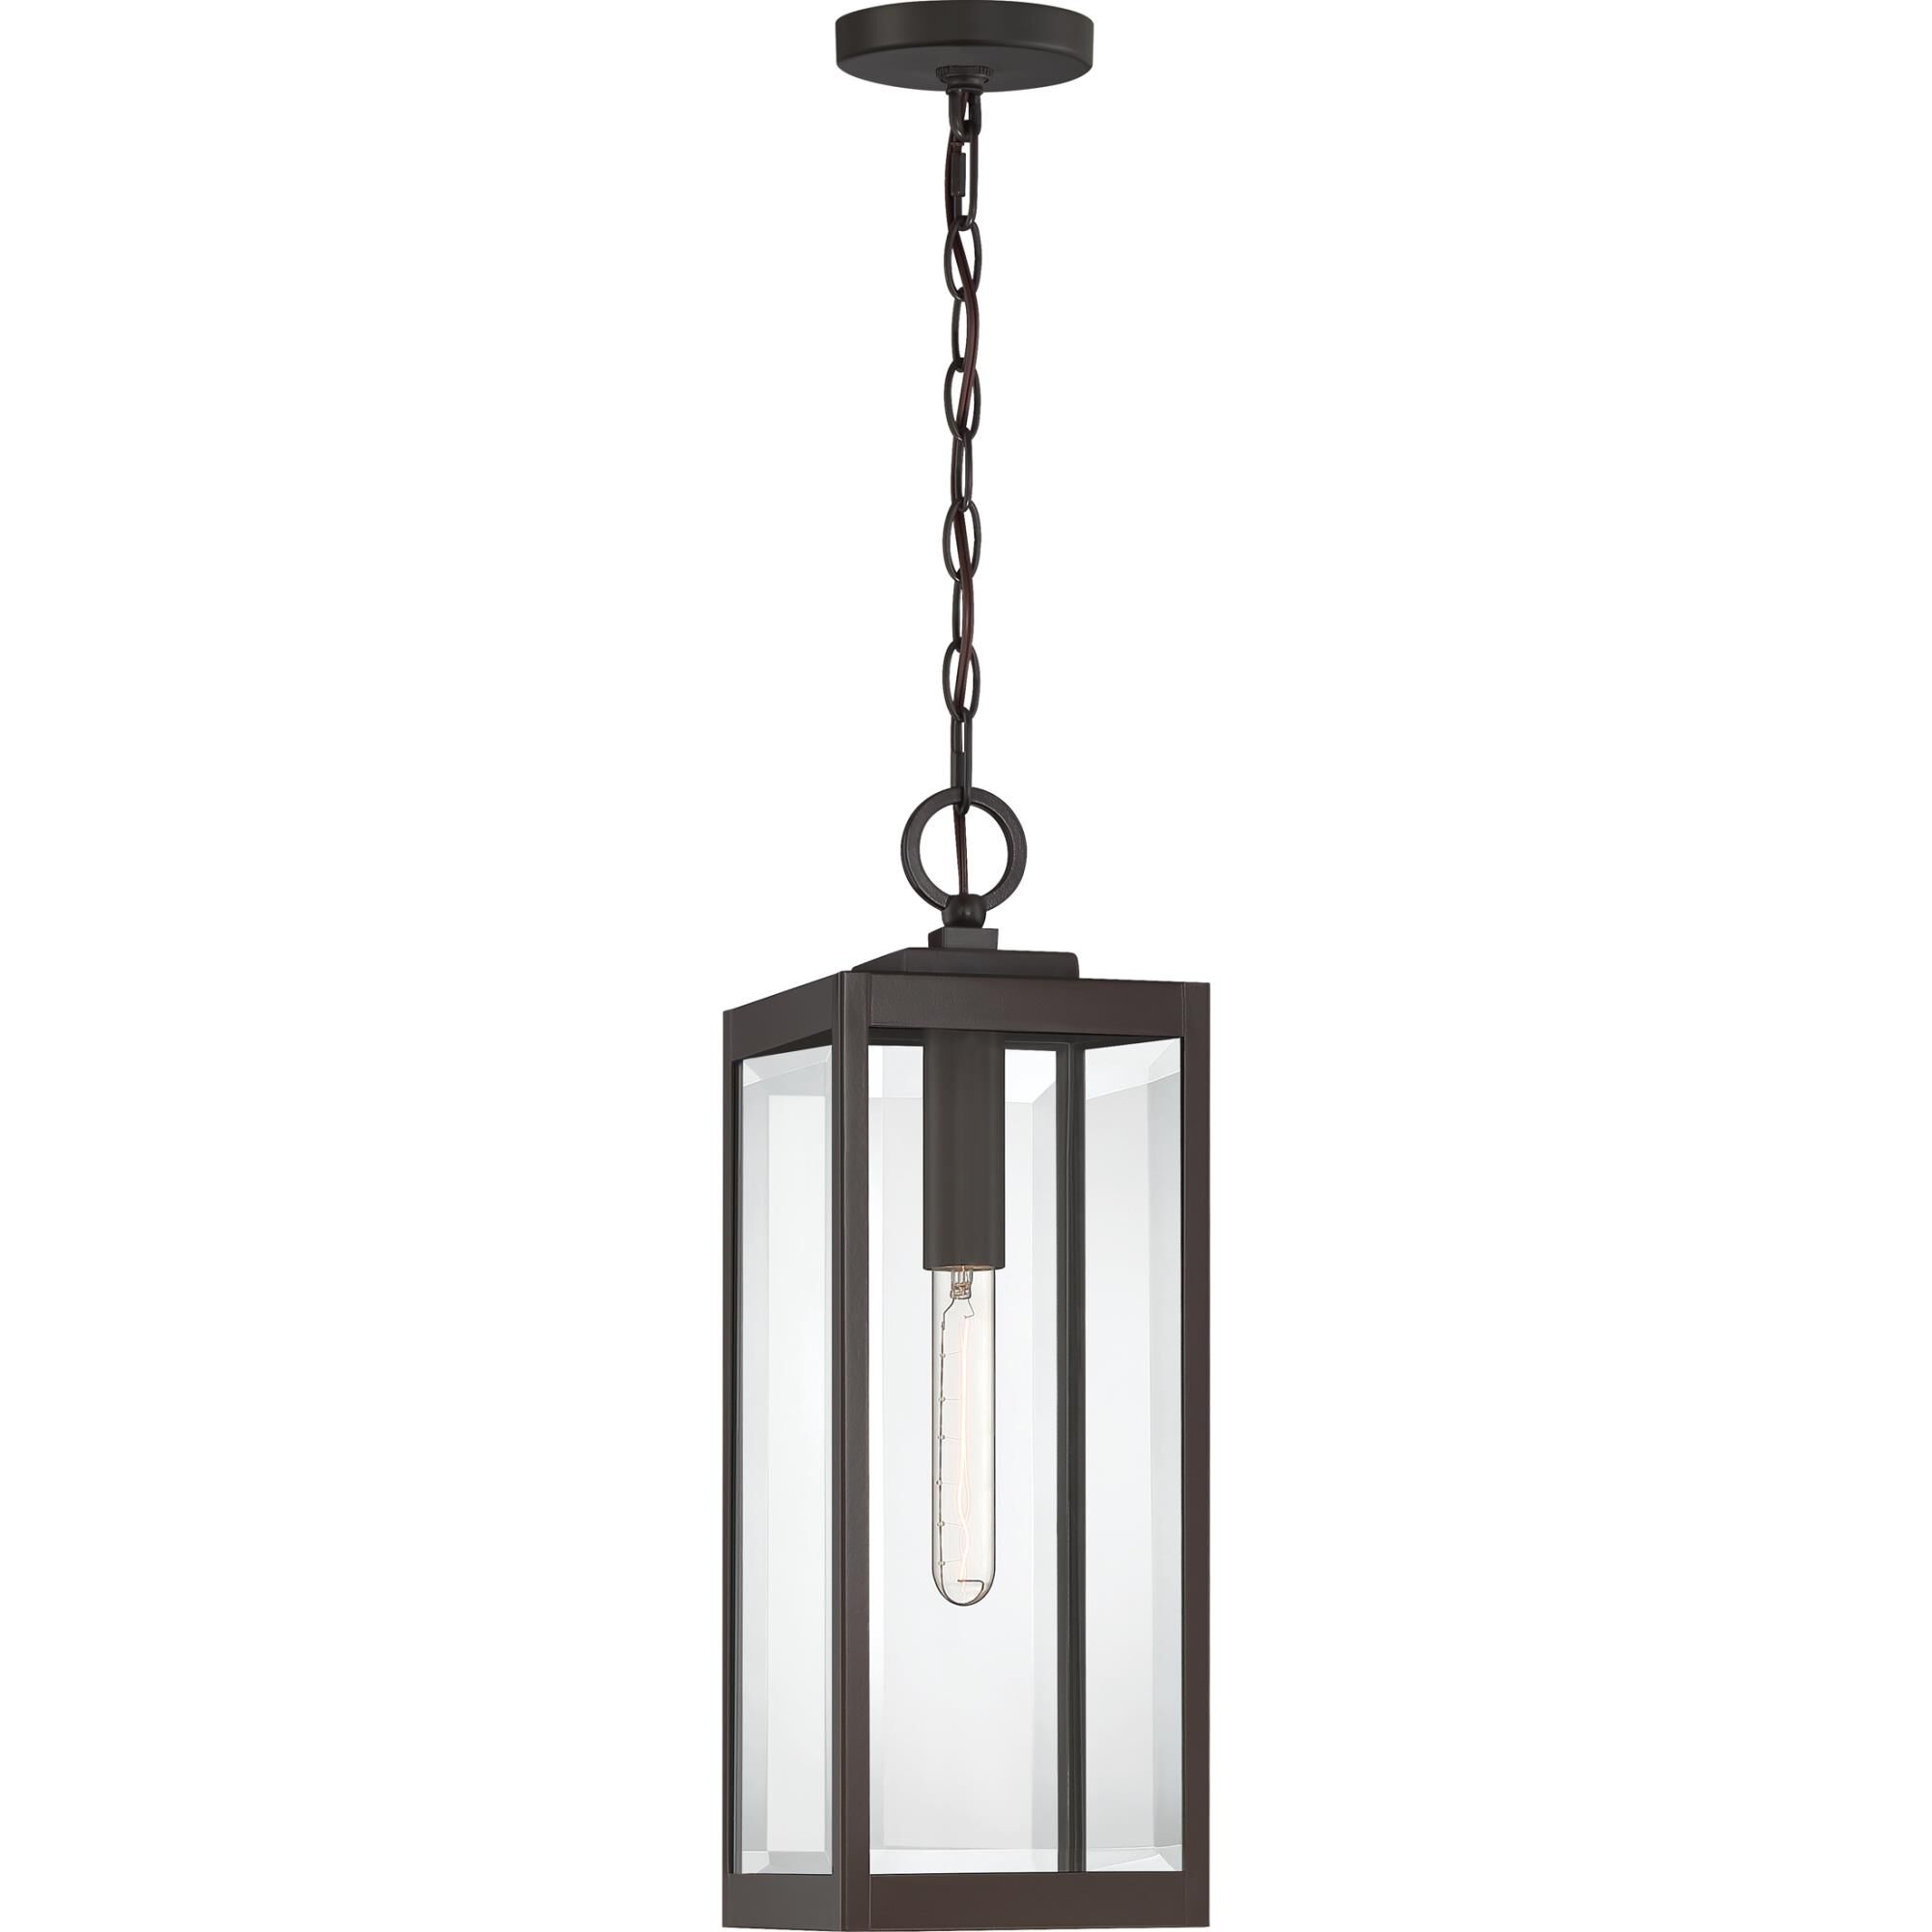 Photos - Chandelier / Lamp Quoizel 20 Inch Tall Outdoor Hanging Lantern - WVR1907WT - Transitional WV 